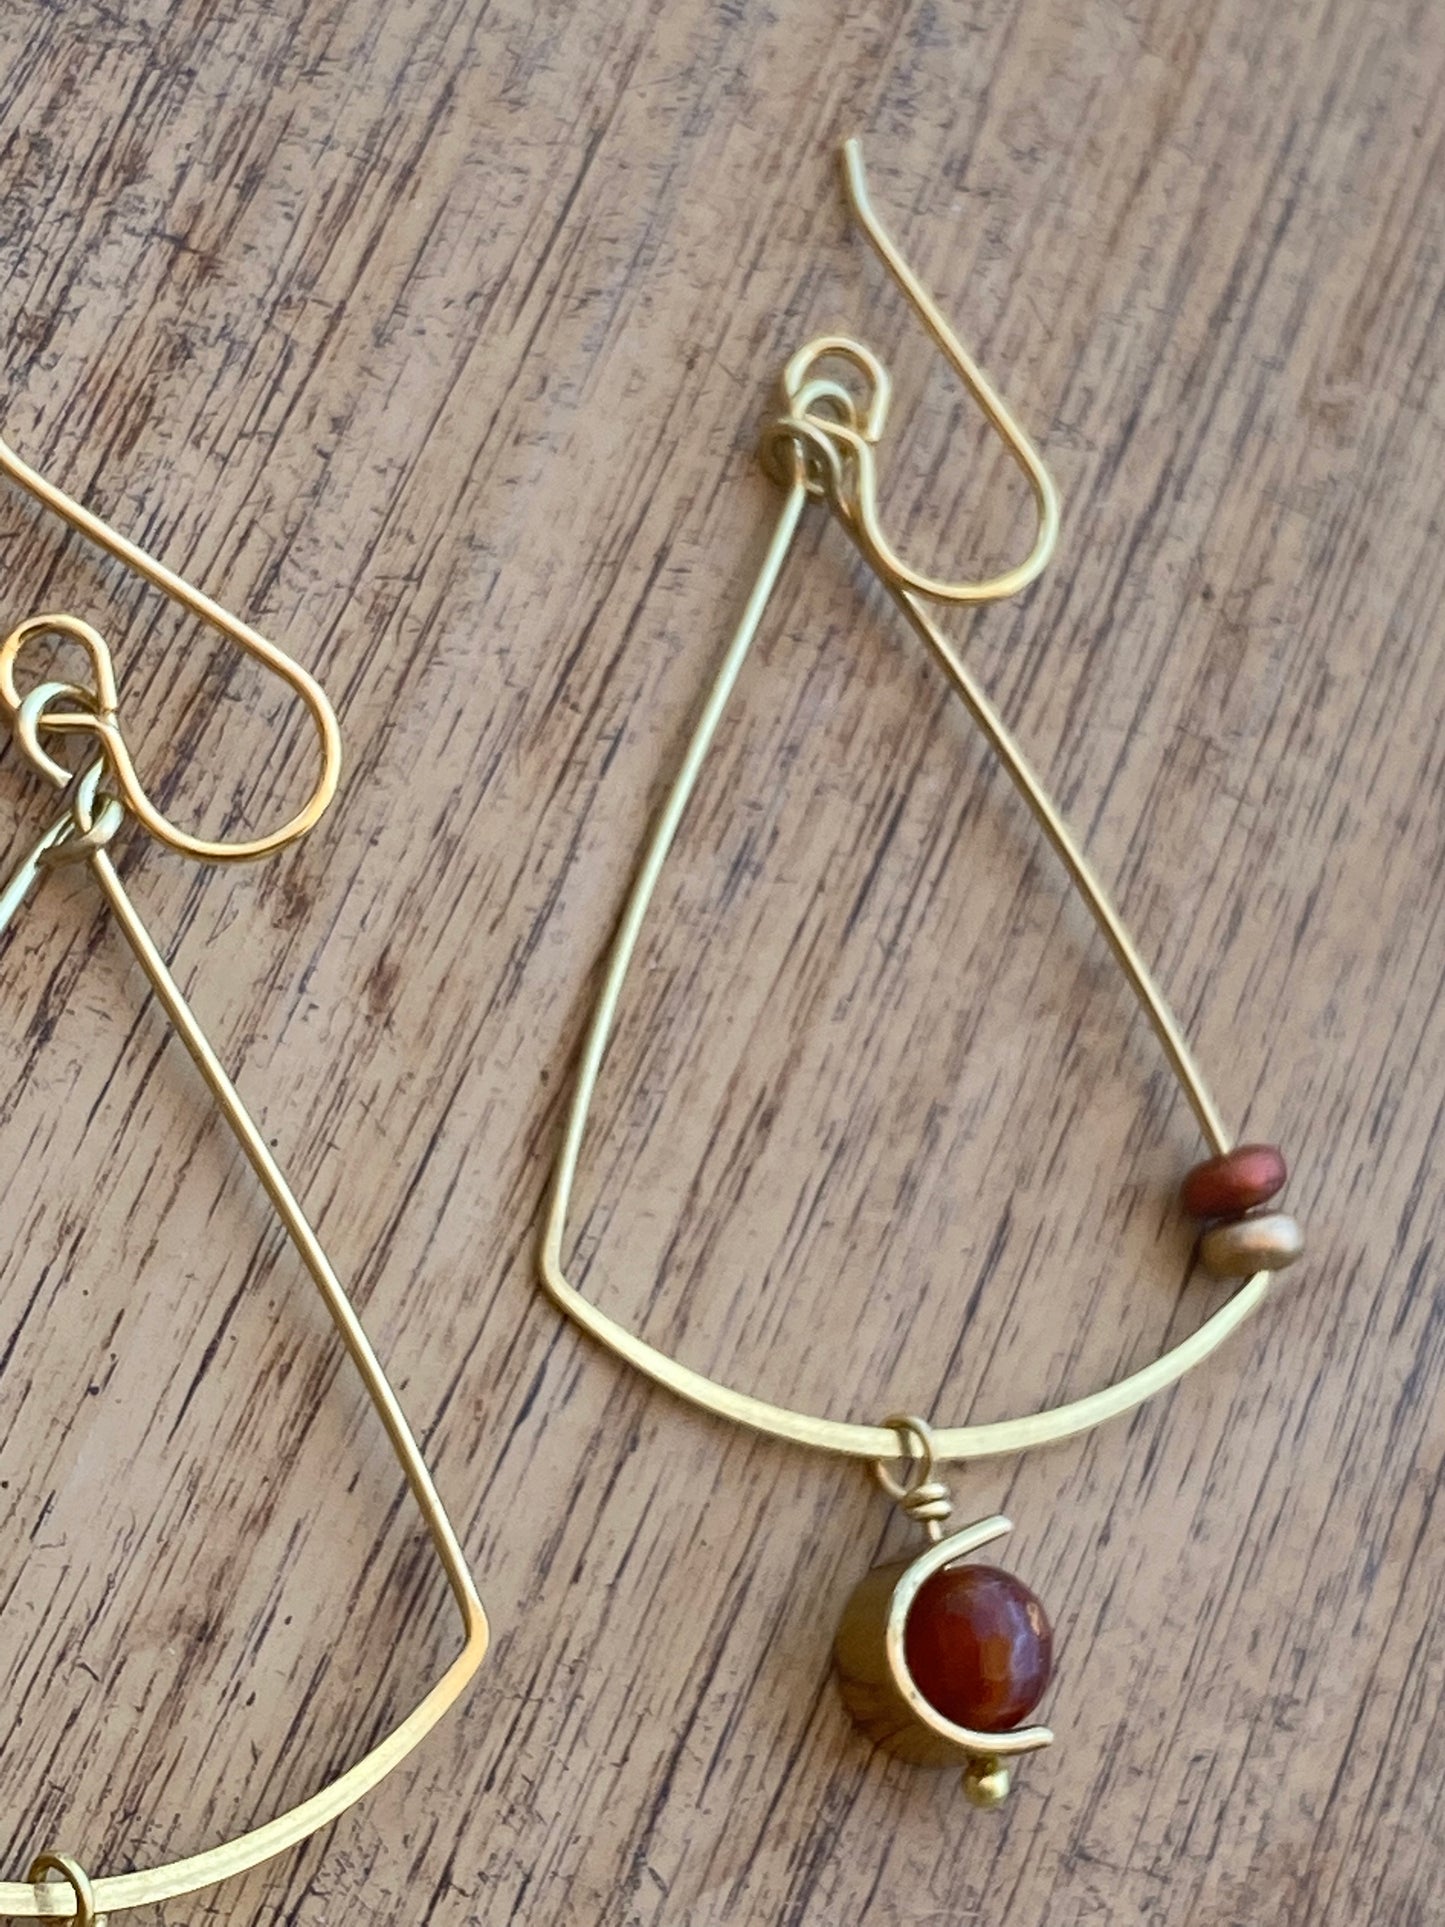 Earrings: Brass Dangles with faceted Jasper  and glass bead accent